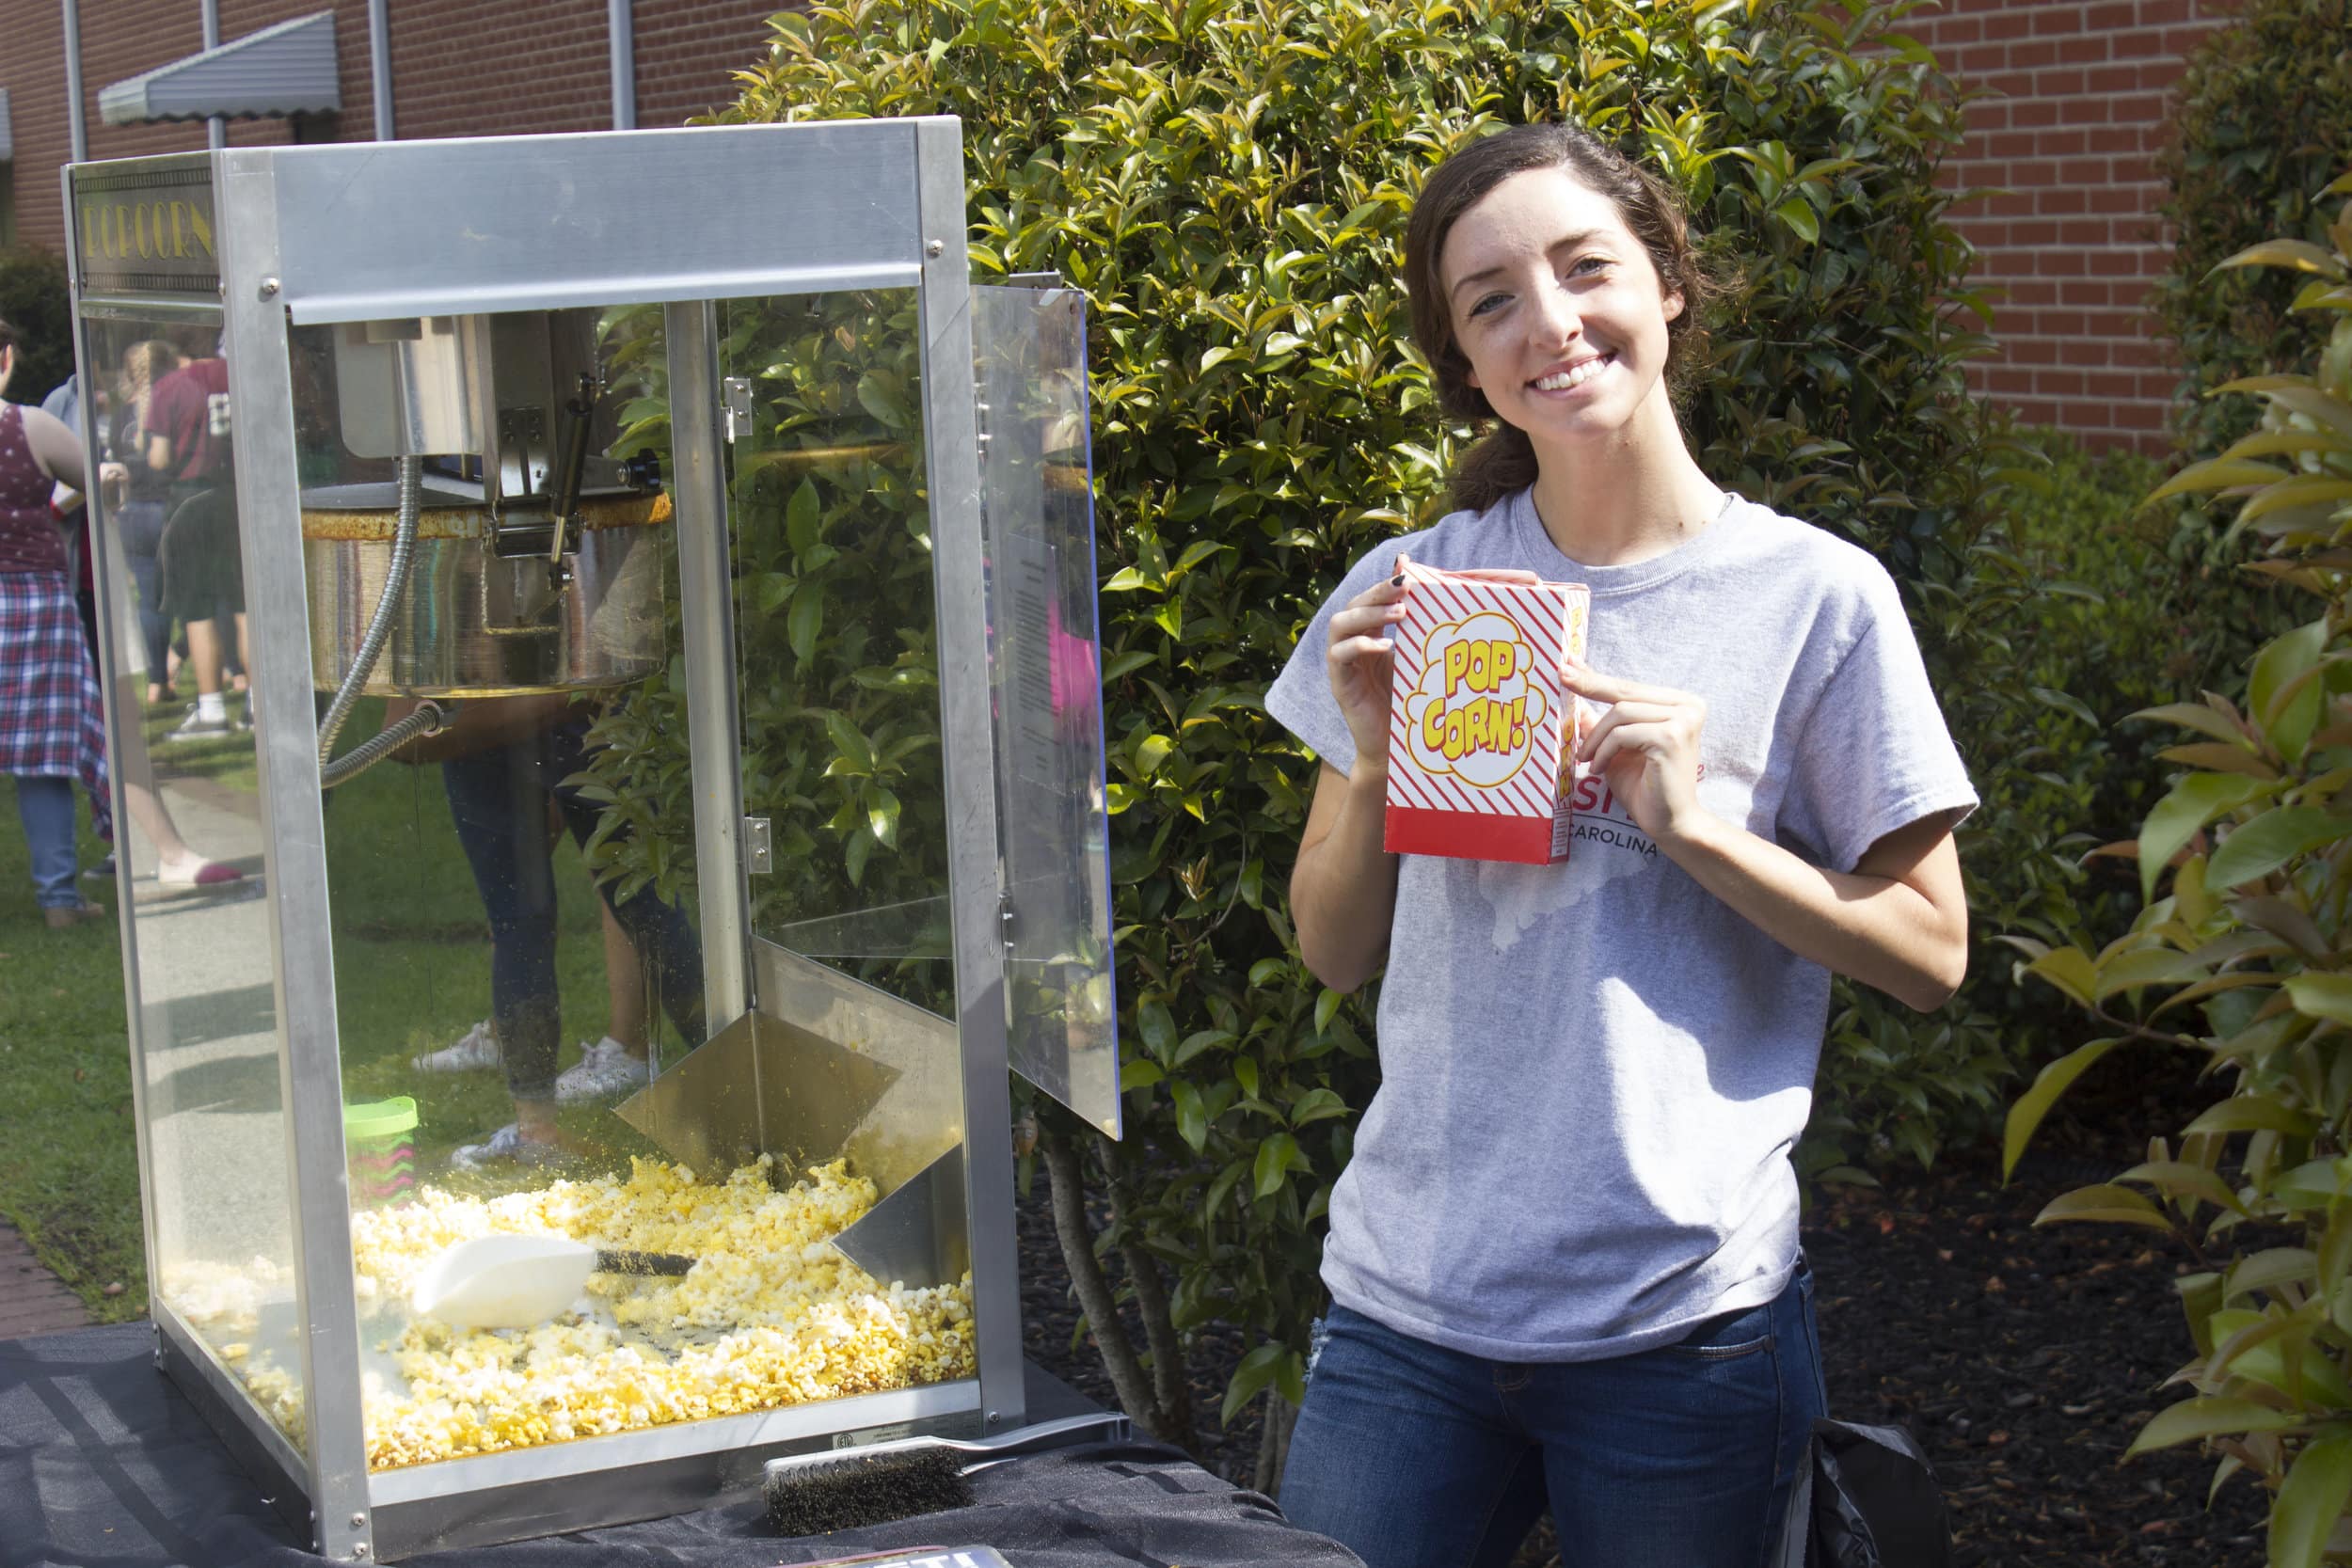 Bailey Pattson shows her excitement for the incoming freshmen class of 2021 by serving them popcorn.